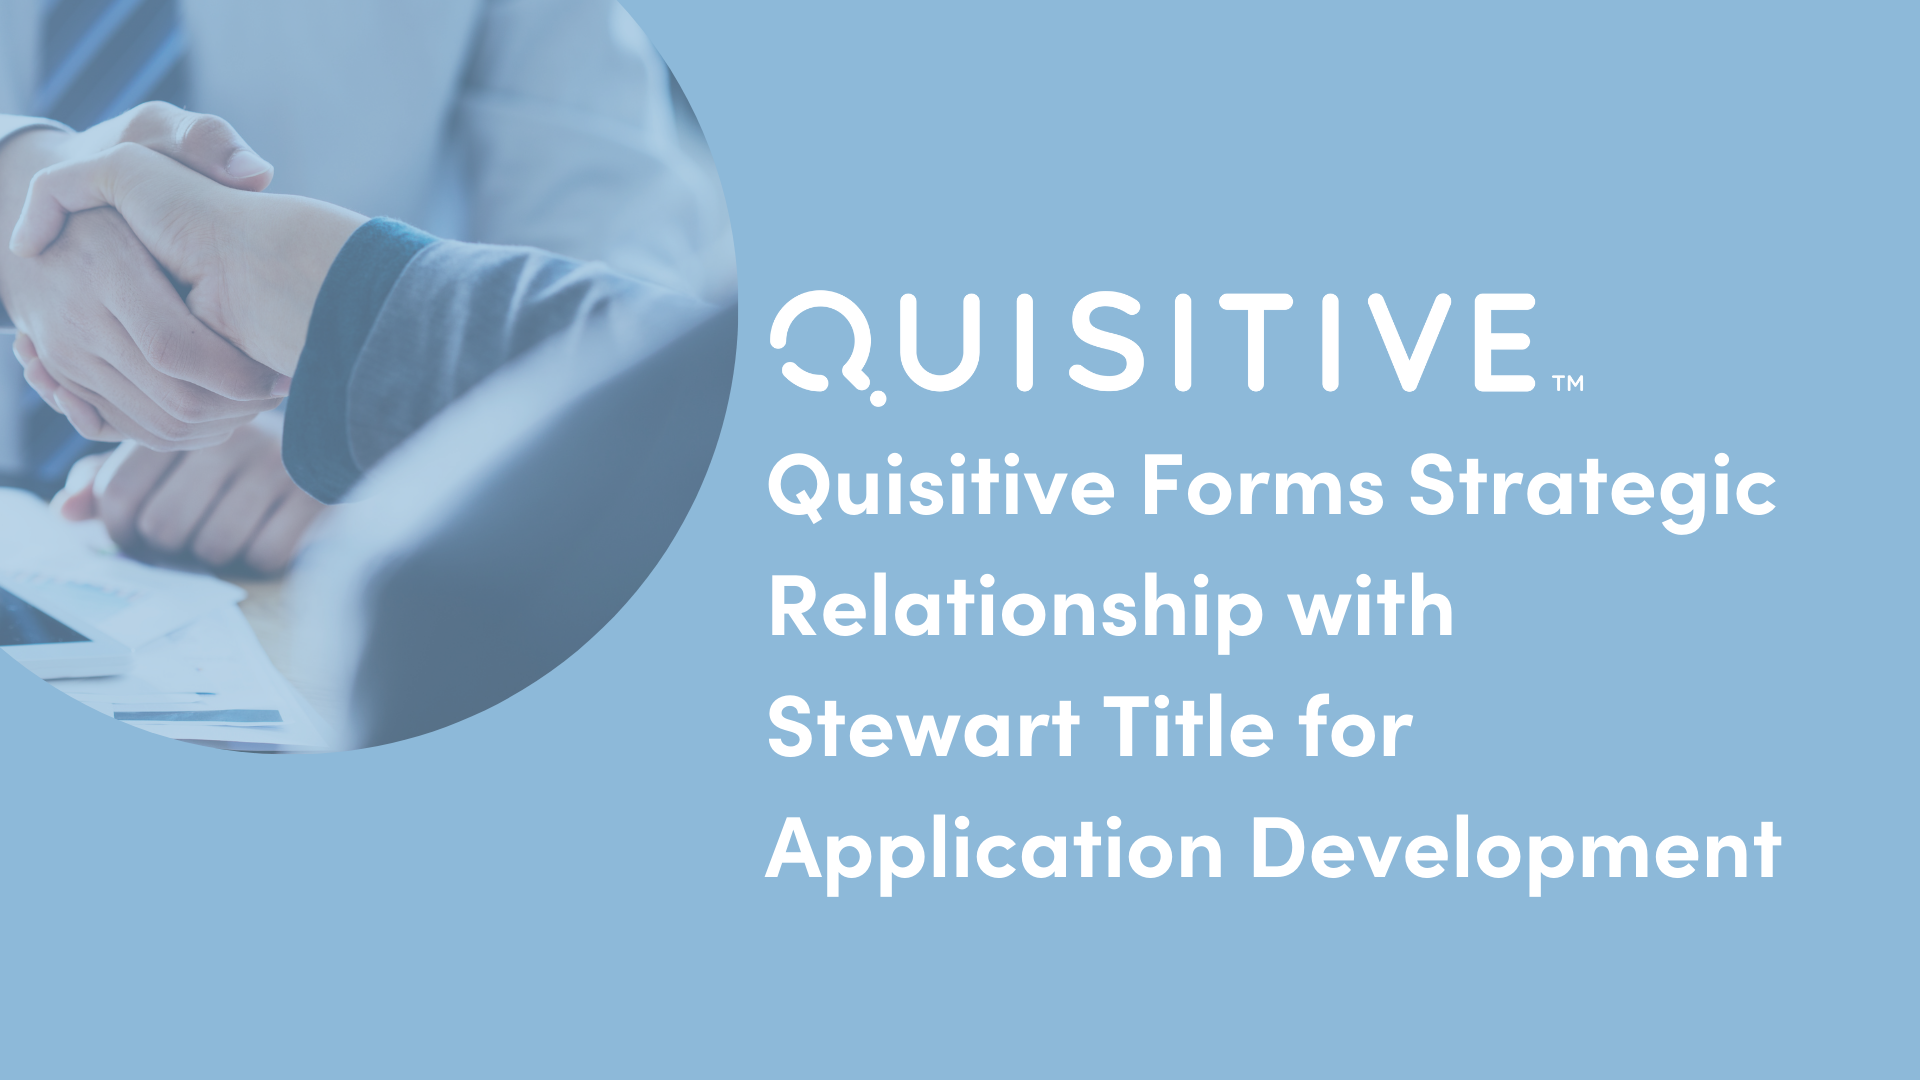 Quisitive logo and photo of handshake with text that reads "Quisitive forms strategic relationship with Stewart Title for application development